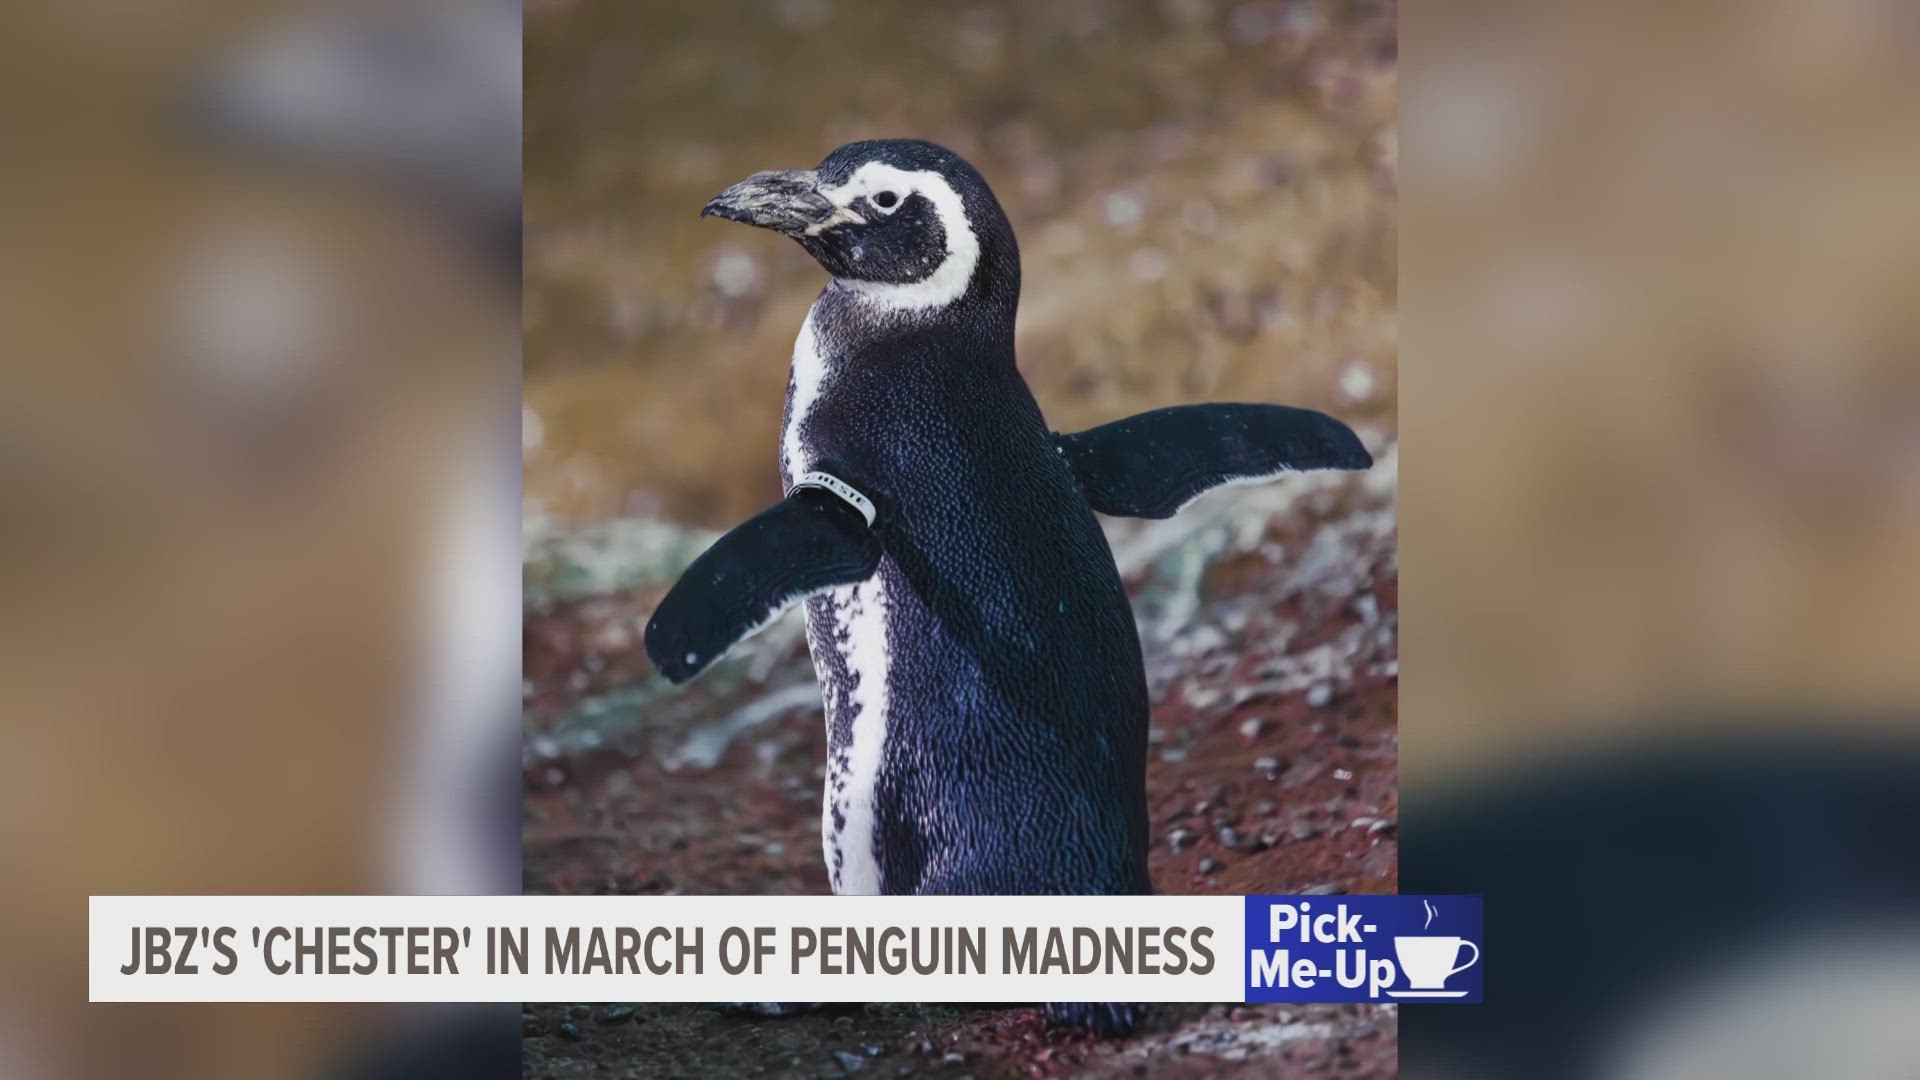 Chester, the Magellanic penguin from John Ball Zoo, is competing against 47 other penguins to be named the "March of the Penguin Madness" tournament champion!